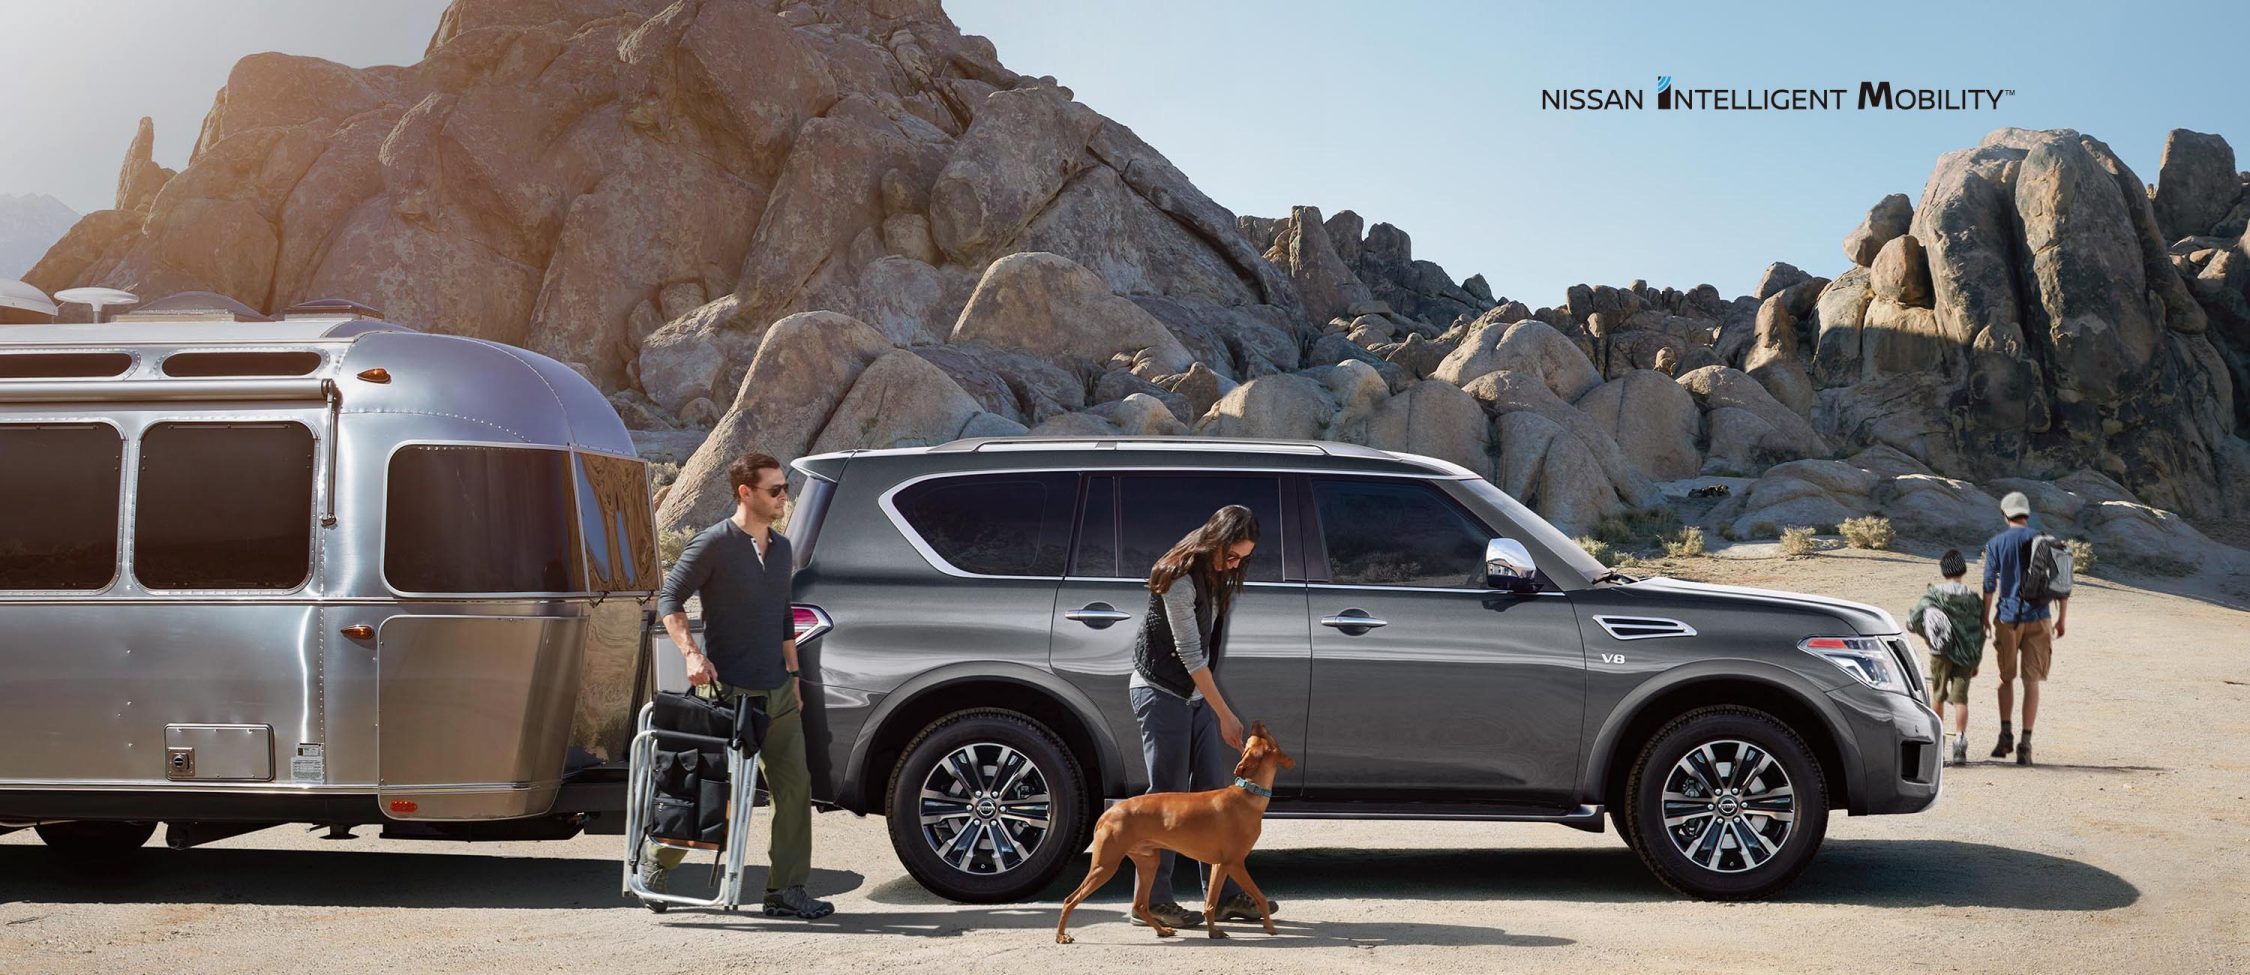 A gray 2020 Nissan Armada parked near the desert with a family and dog.